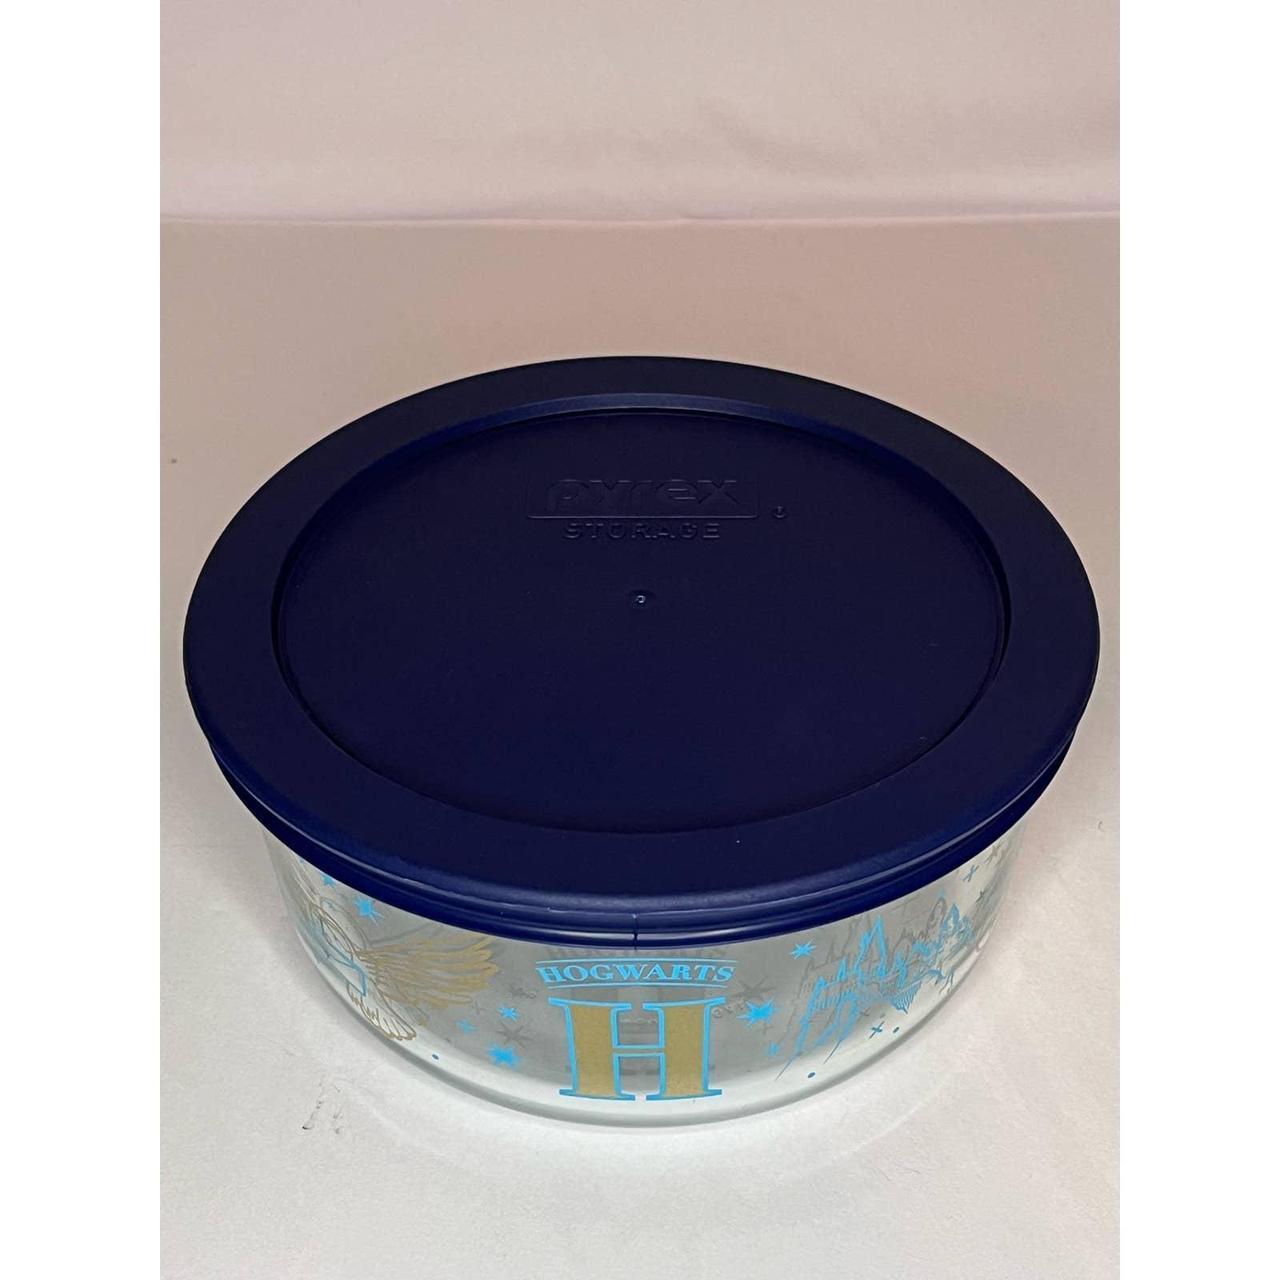 Introducing the Limited Edition Harry Potter Pyrex - Depop